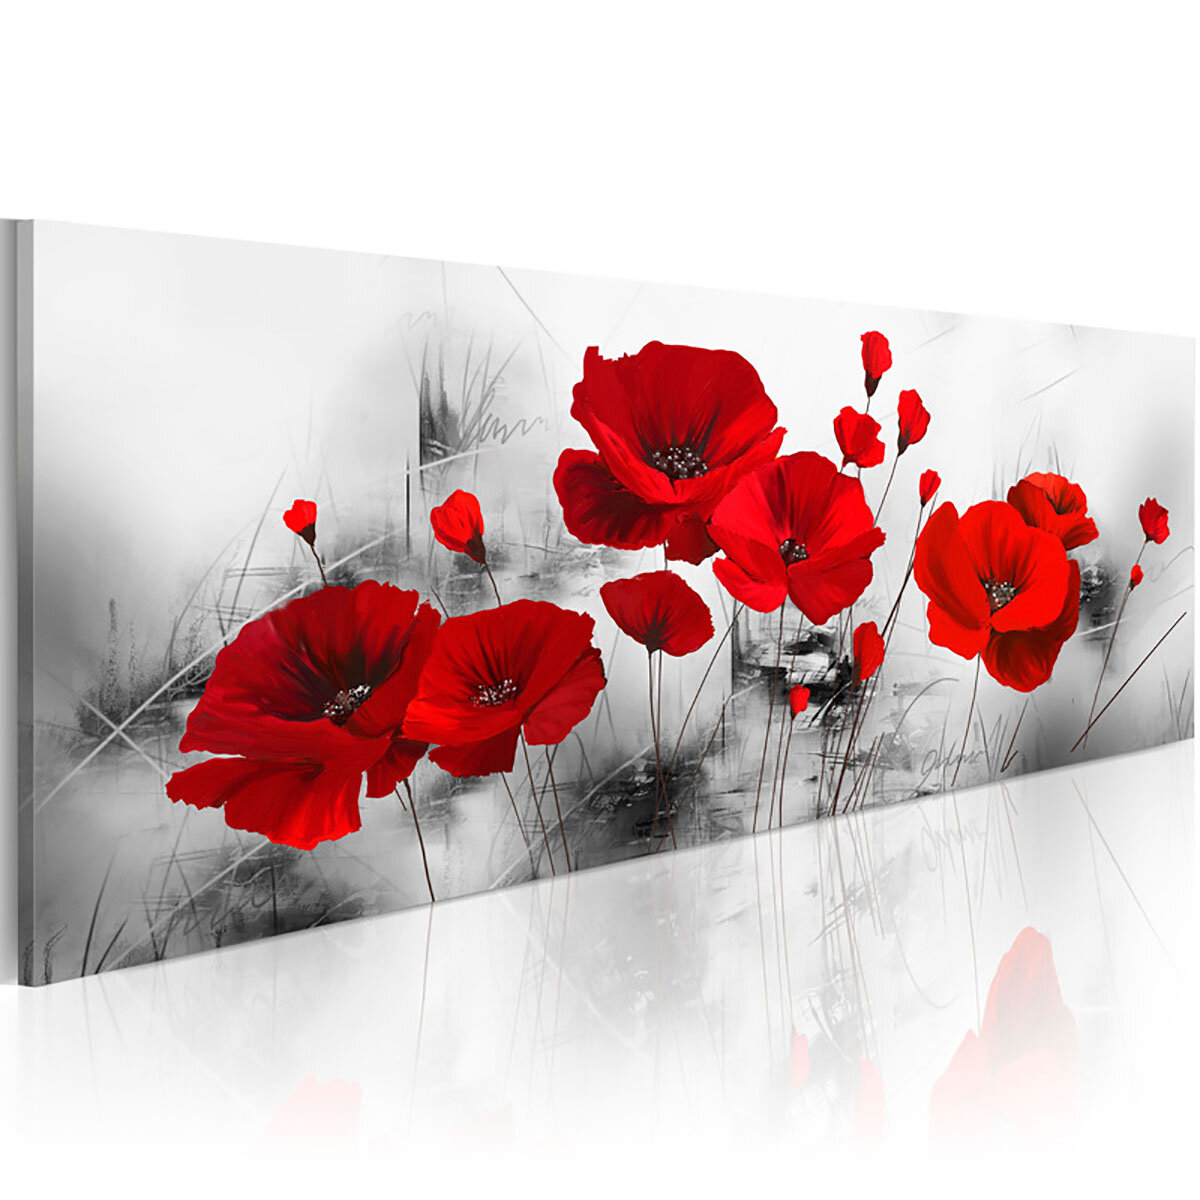 

Abstract Flowers Canvas Painting Wall Decorative Printing Art Picture Frameless Home Office Decoration